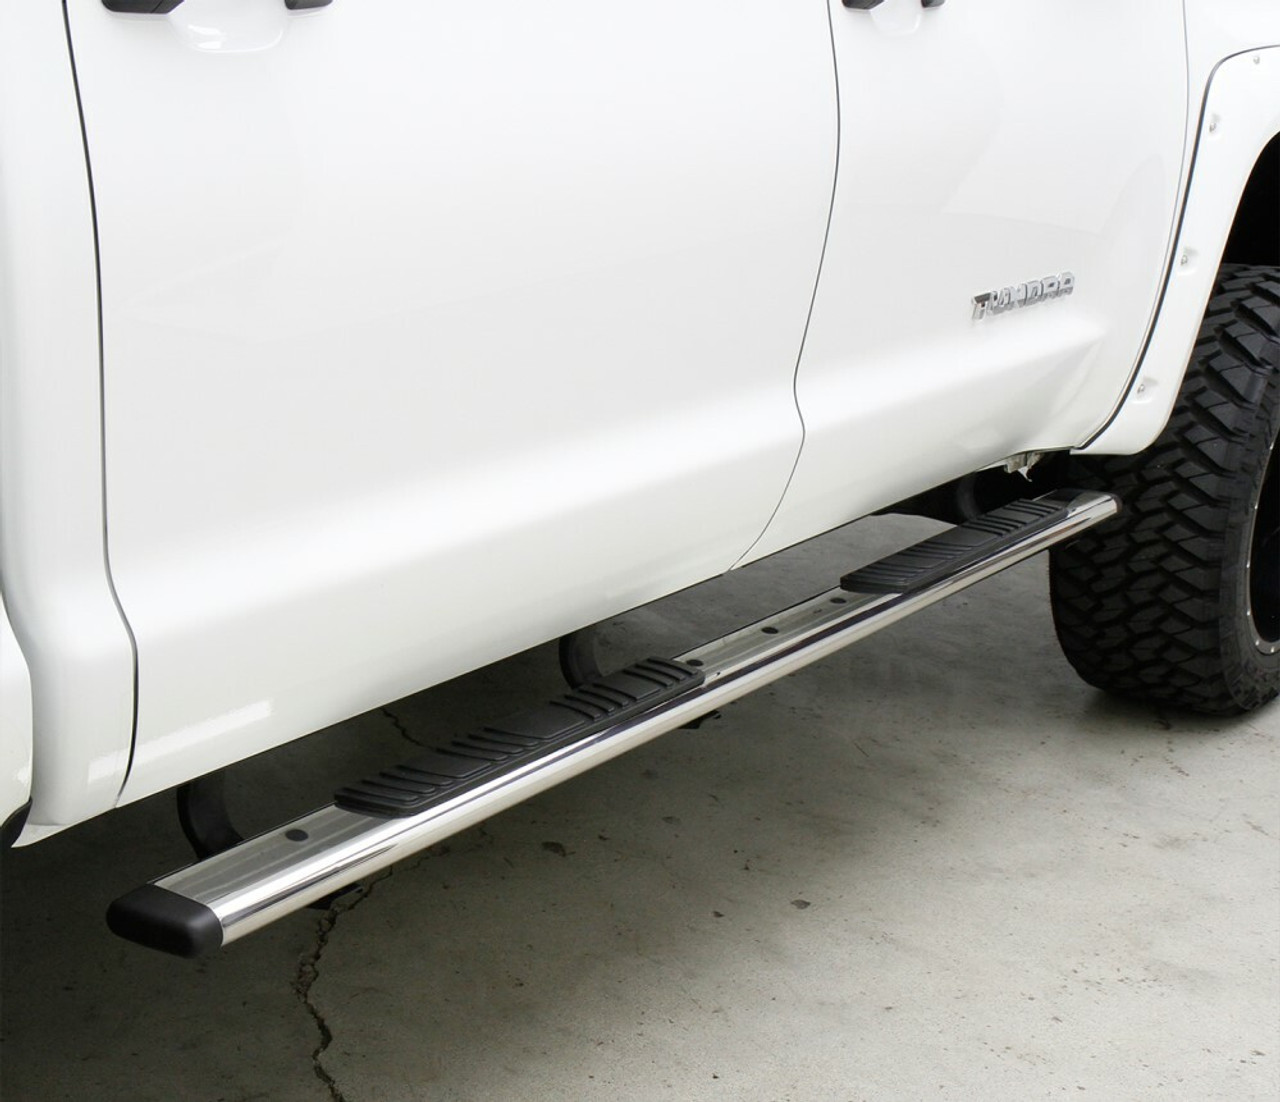 Go Rhino 685036880T Ford, Ranger, 2019 - 2021, 5 inch OE Xtreme Low Profile - Complete Kit: Sidesteps + Brackets, Galvanized Steel, Textured black, 650080T side bars + 6803685 OE Xtreme Brackets. 5 inch wide x 80 inch long side bars